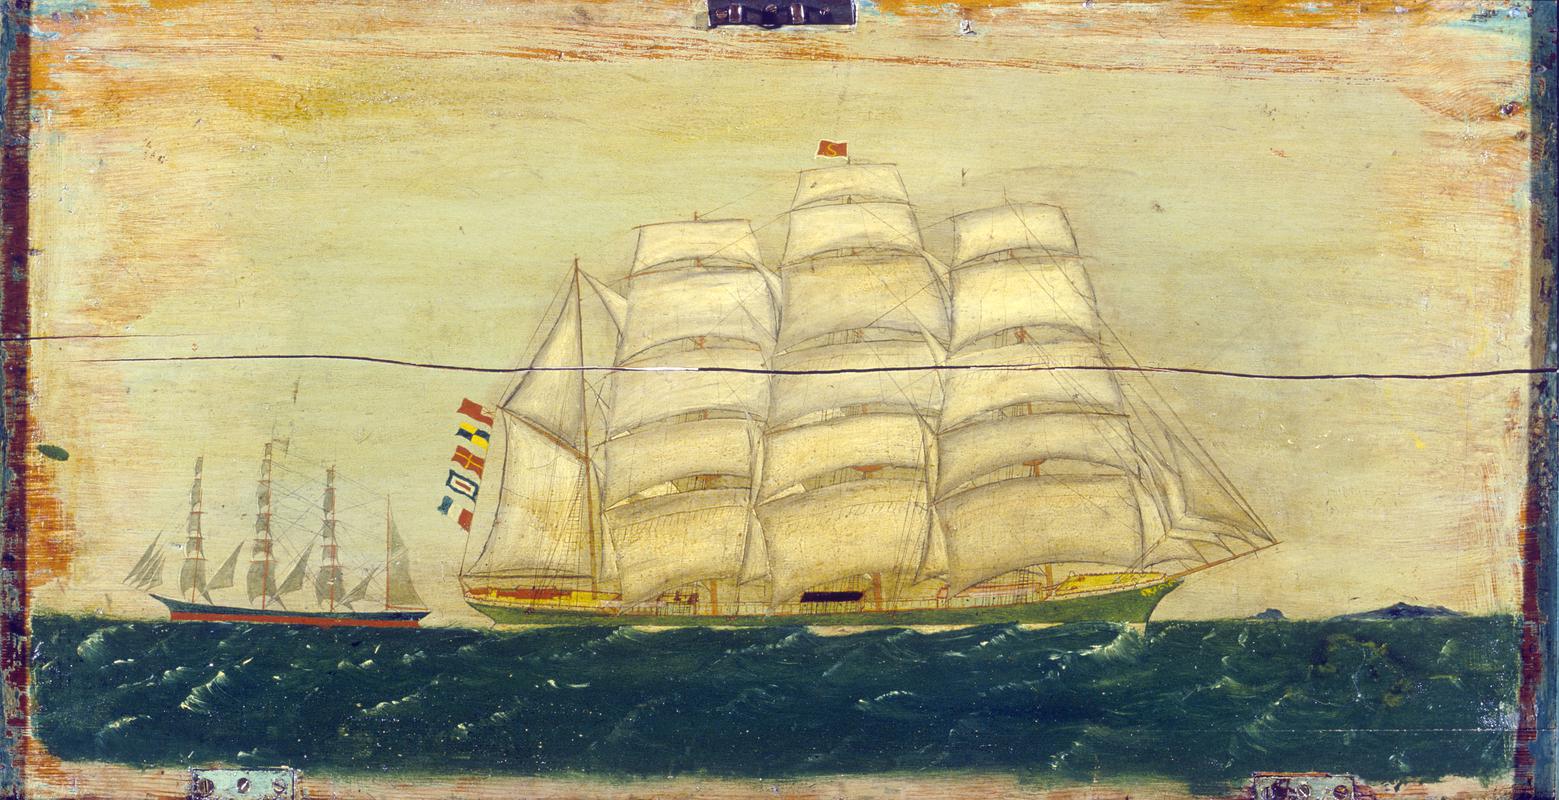 Painting of a sailing vessel on a chest lid